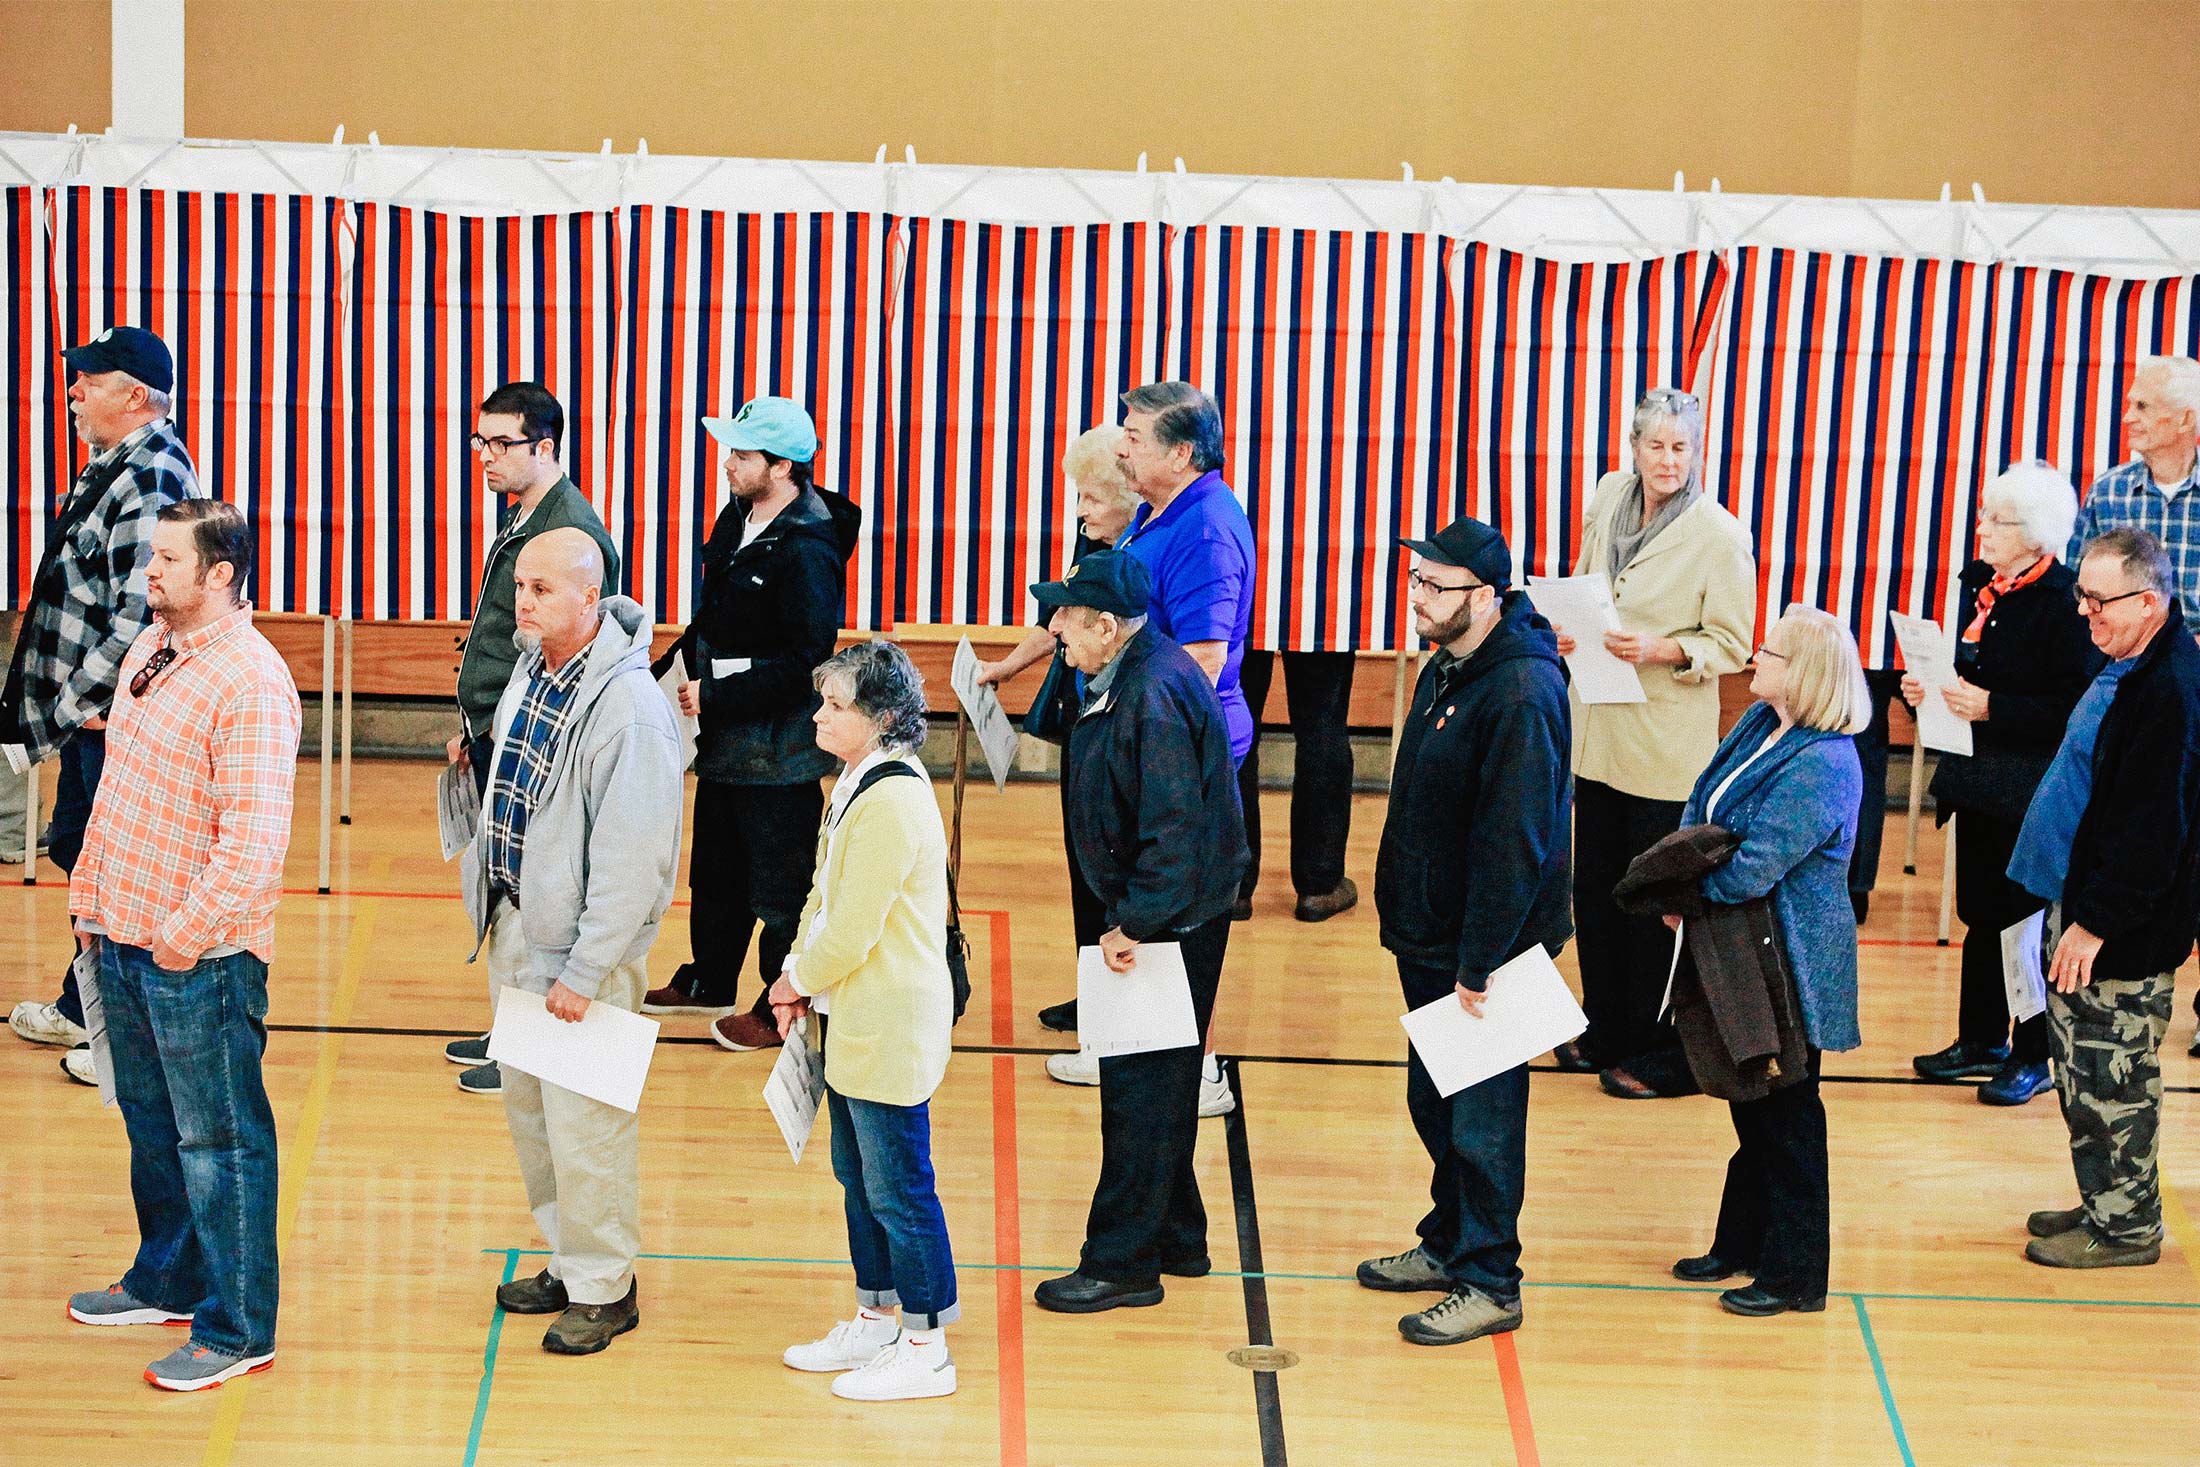 Voters wait in line to cast their votes in a gym, in front of red, white, and blue booths.